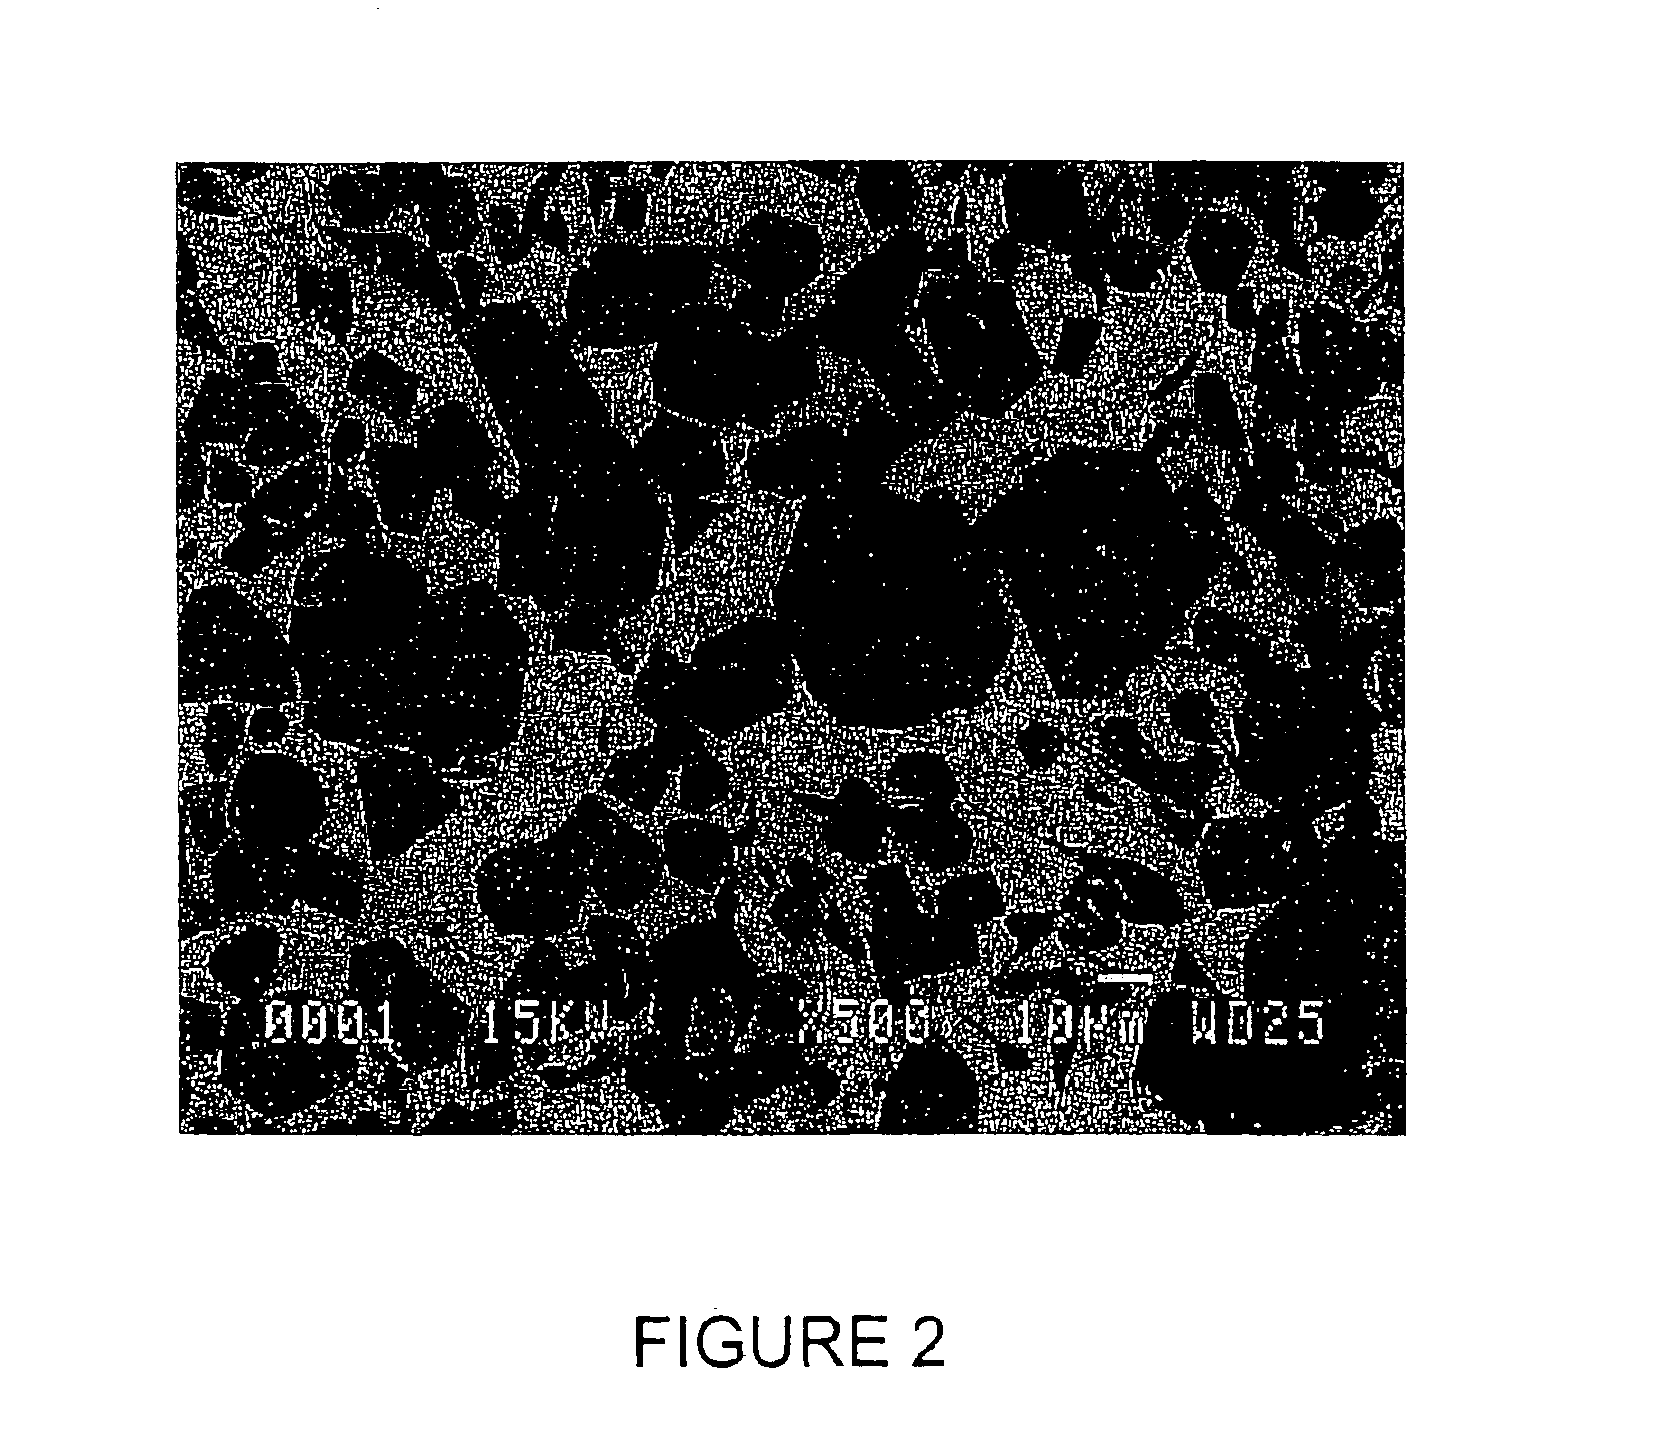 Method for oxidizing treatment of steel plant slag to obtain cement-based materials